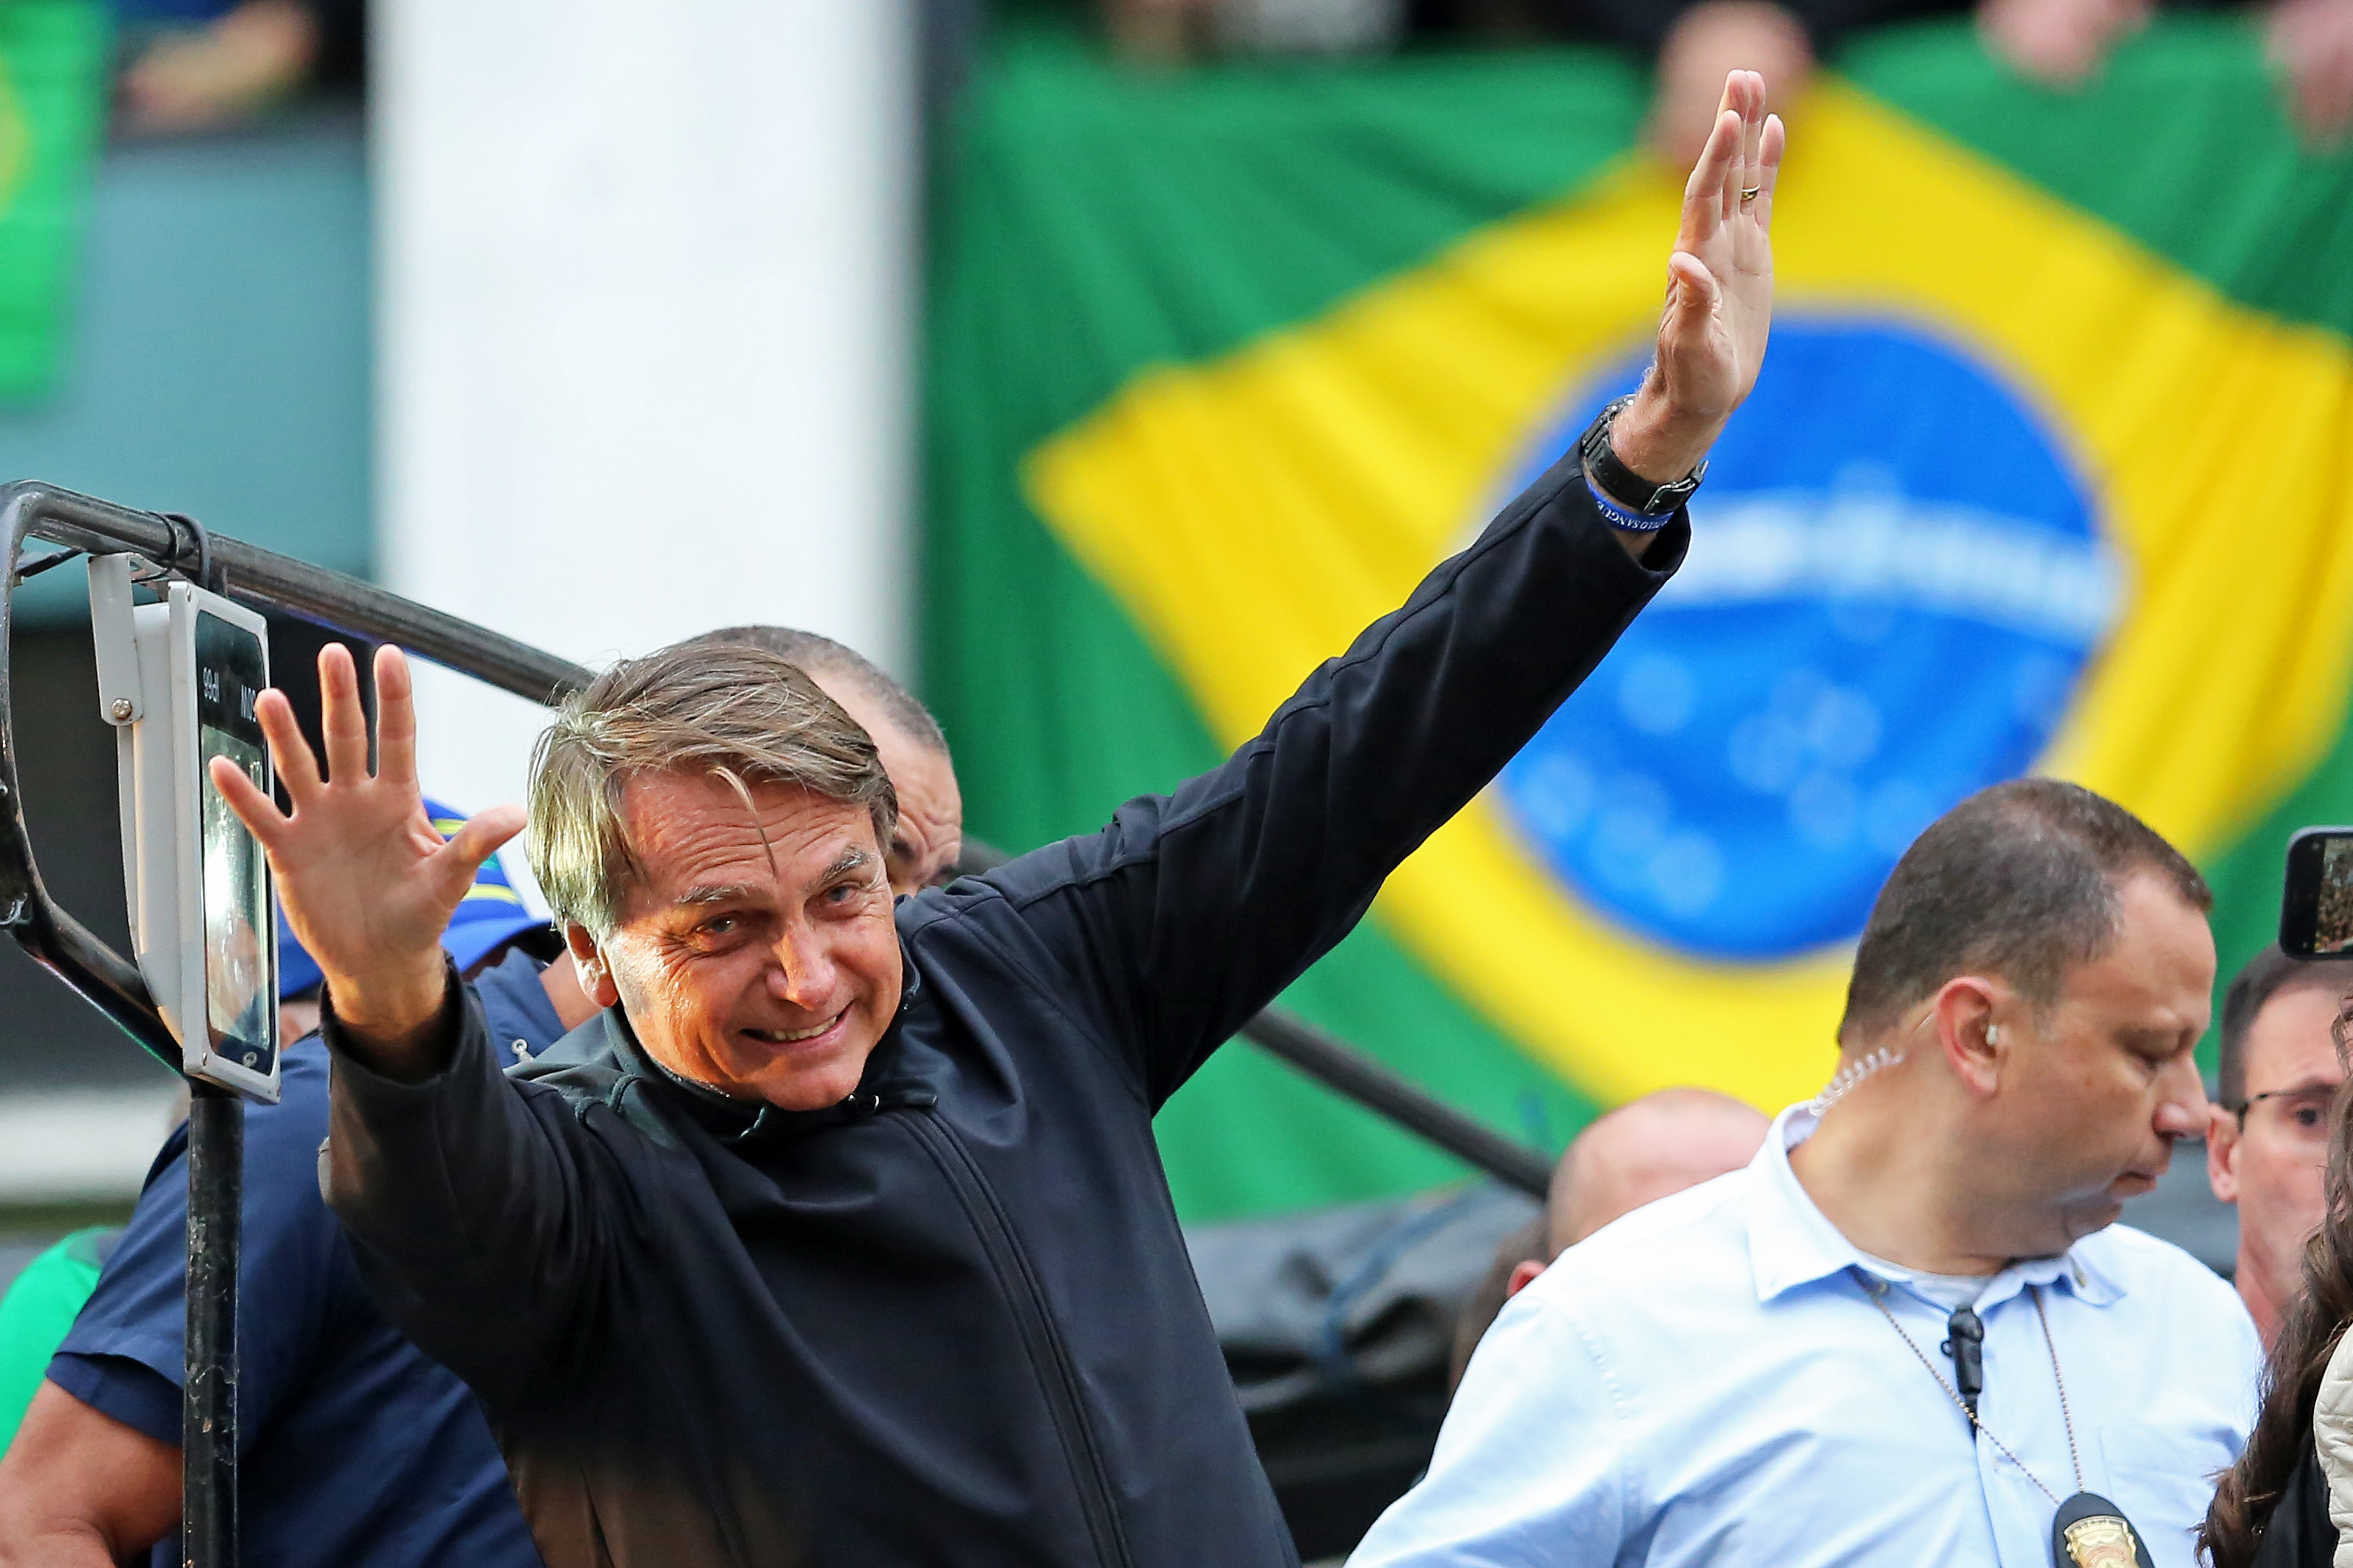 President of Brazil Jair Bolsonaro waves to supporters during a campaign rally on August 31, 2022 in Curitiba, Brazil. (Heuler Andrey/Getty Images)